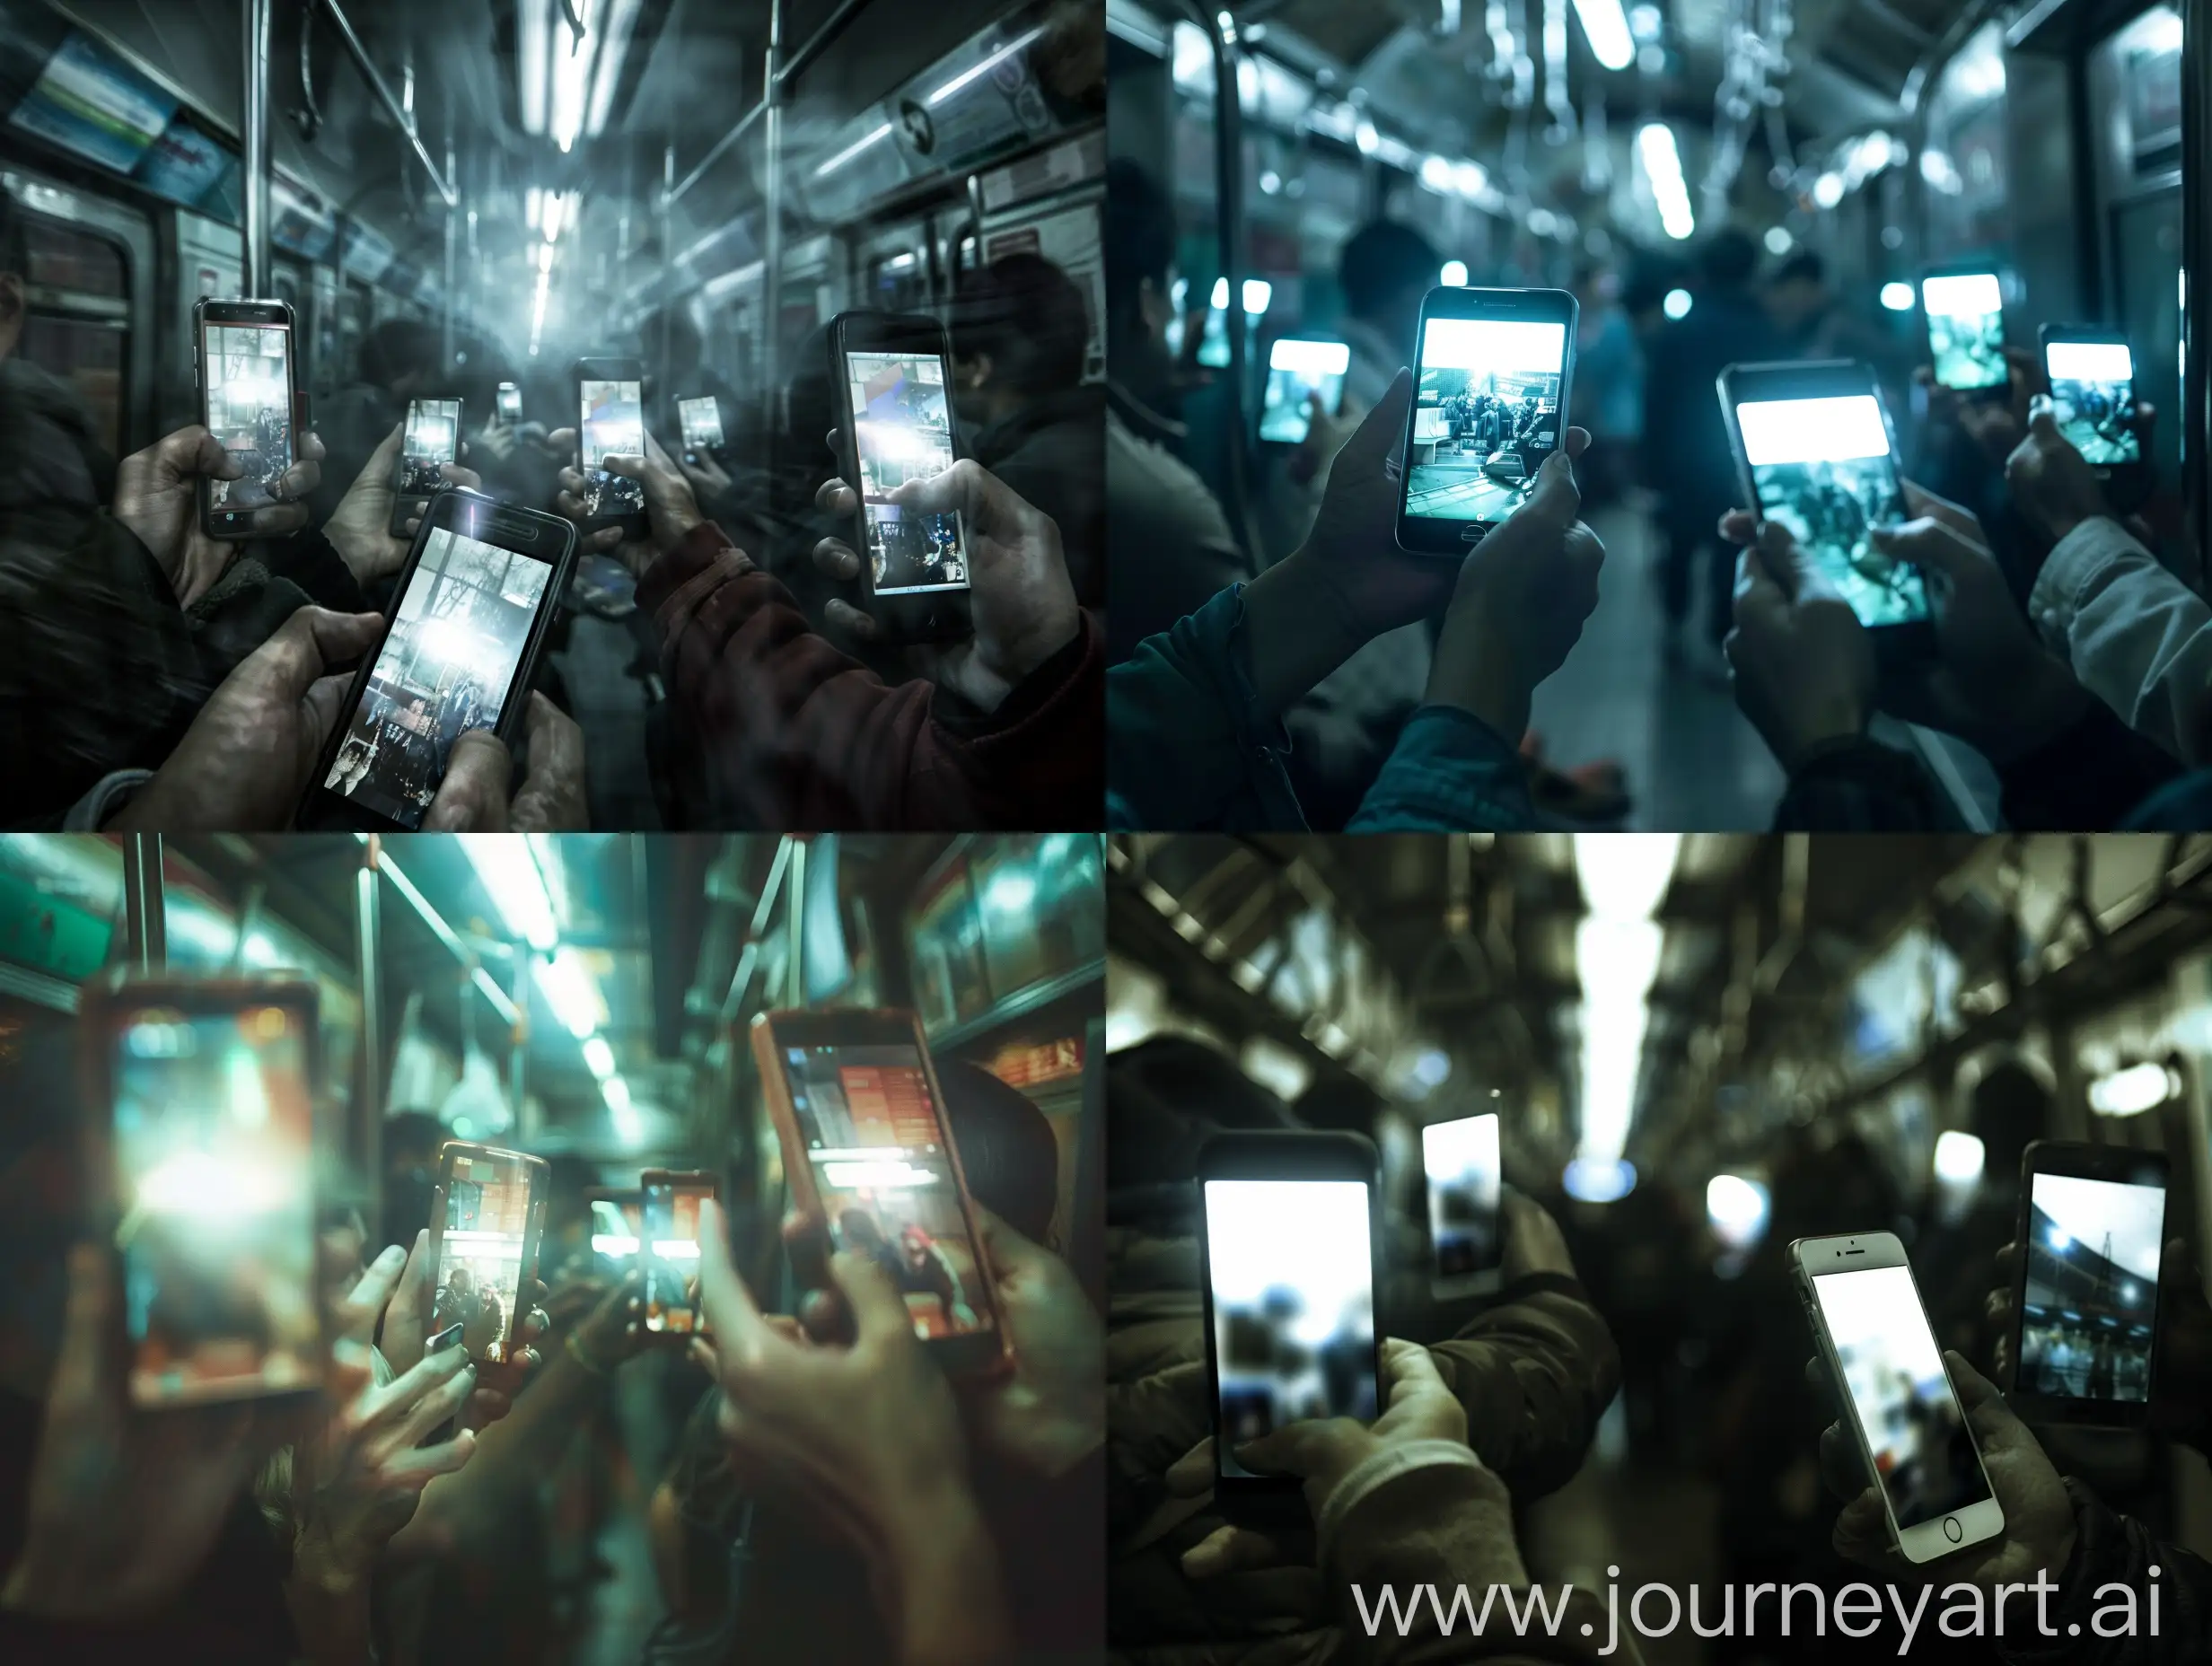 A raw, editorial photograph capturing a scene inside a metro carriage. Emphasize the focus on handheld devices by blurring the background figures. Show several hands holding smartphones and tablets, but keep faces obscured. Each phone screen displays a bright rectangle of light showing videos and films, contrasting with the dark and gritty environment.